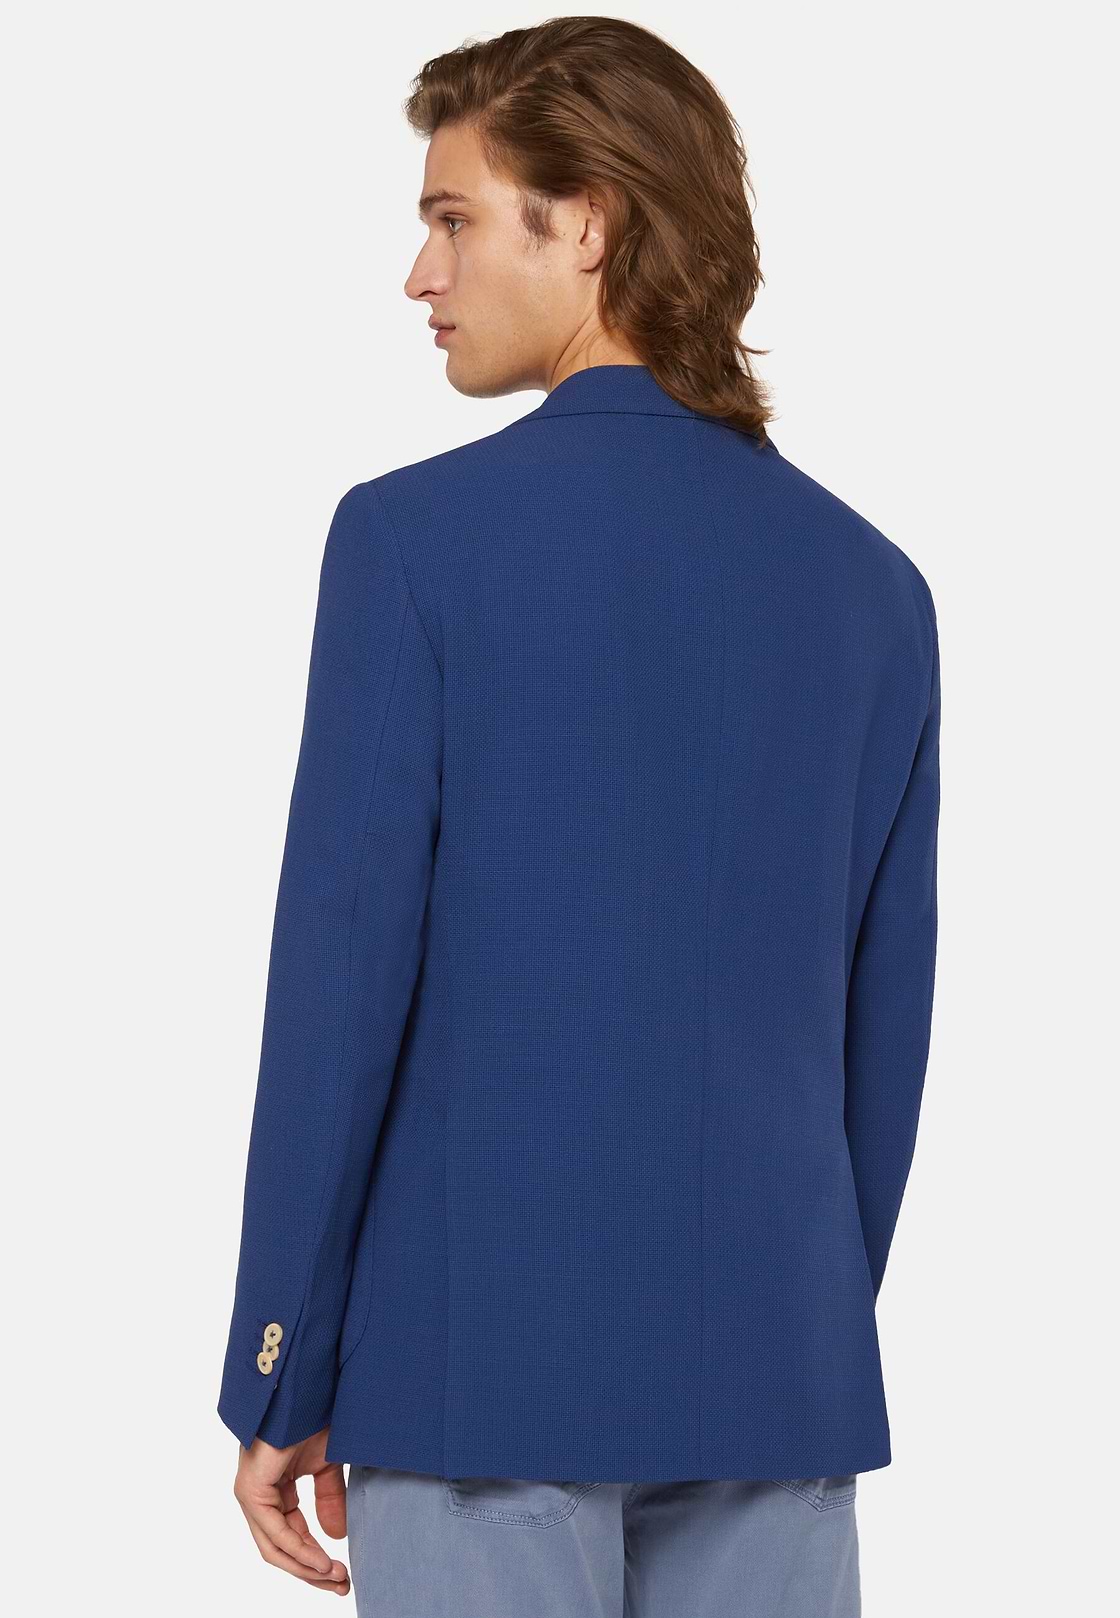 Blue Double-Breasted Jacket In Pure Wool Crepe, Blue, hi-res